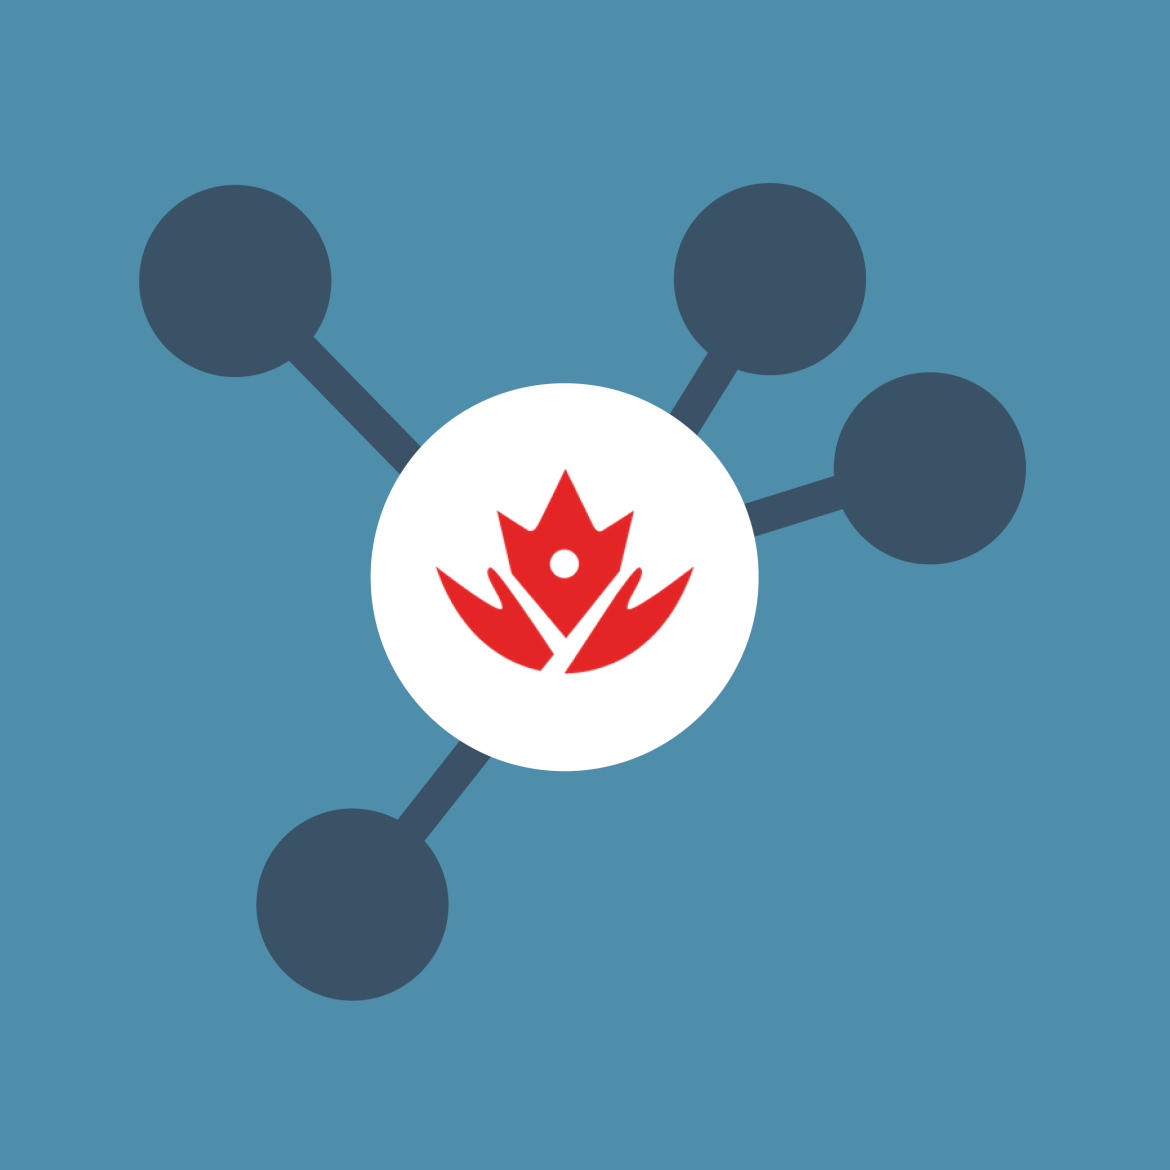 Logo featuring a white circle with a red maple leaf inside, surrounded by four gray circles connected by lines on a blue background.